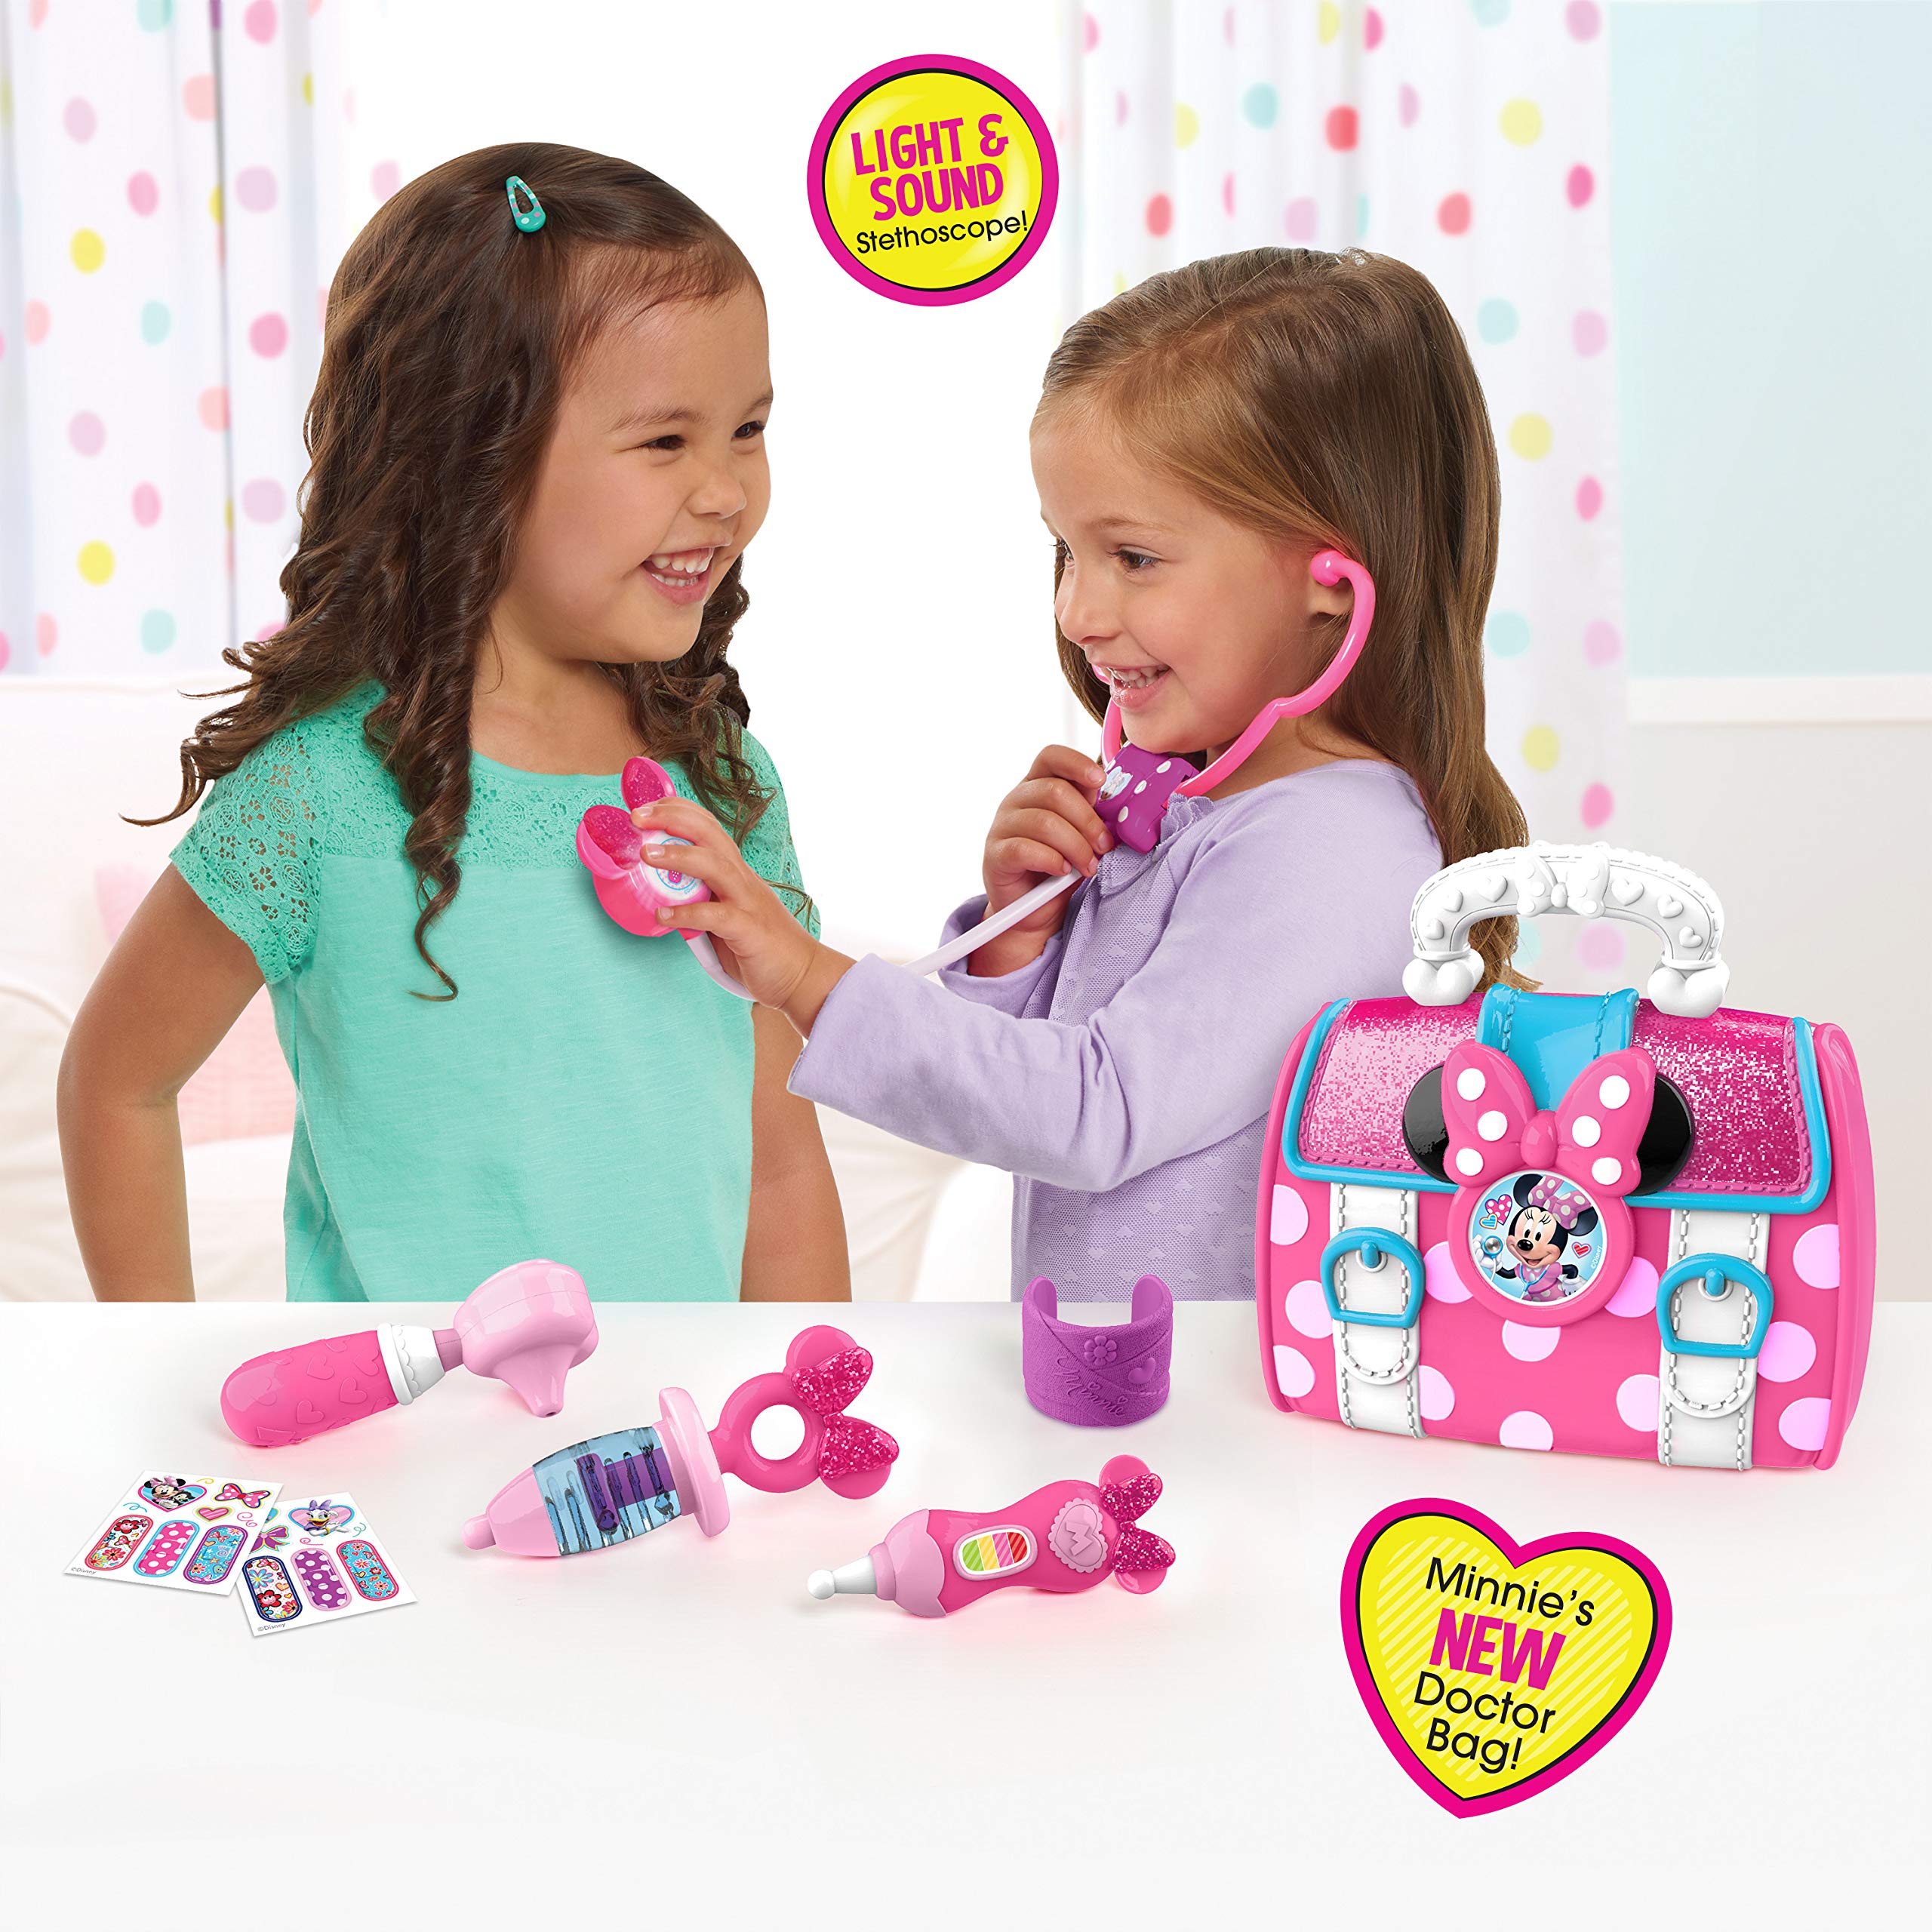 Disney Junior’s Minnie Mouse Bow-Care Doctor Bag Set, Dress Up and Pretend Play, Kids Toys for Ages 3 Up, Gifts and Presents by Just Play